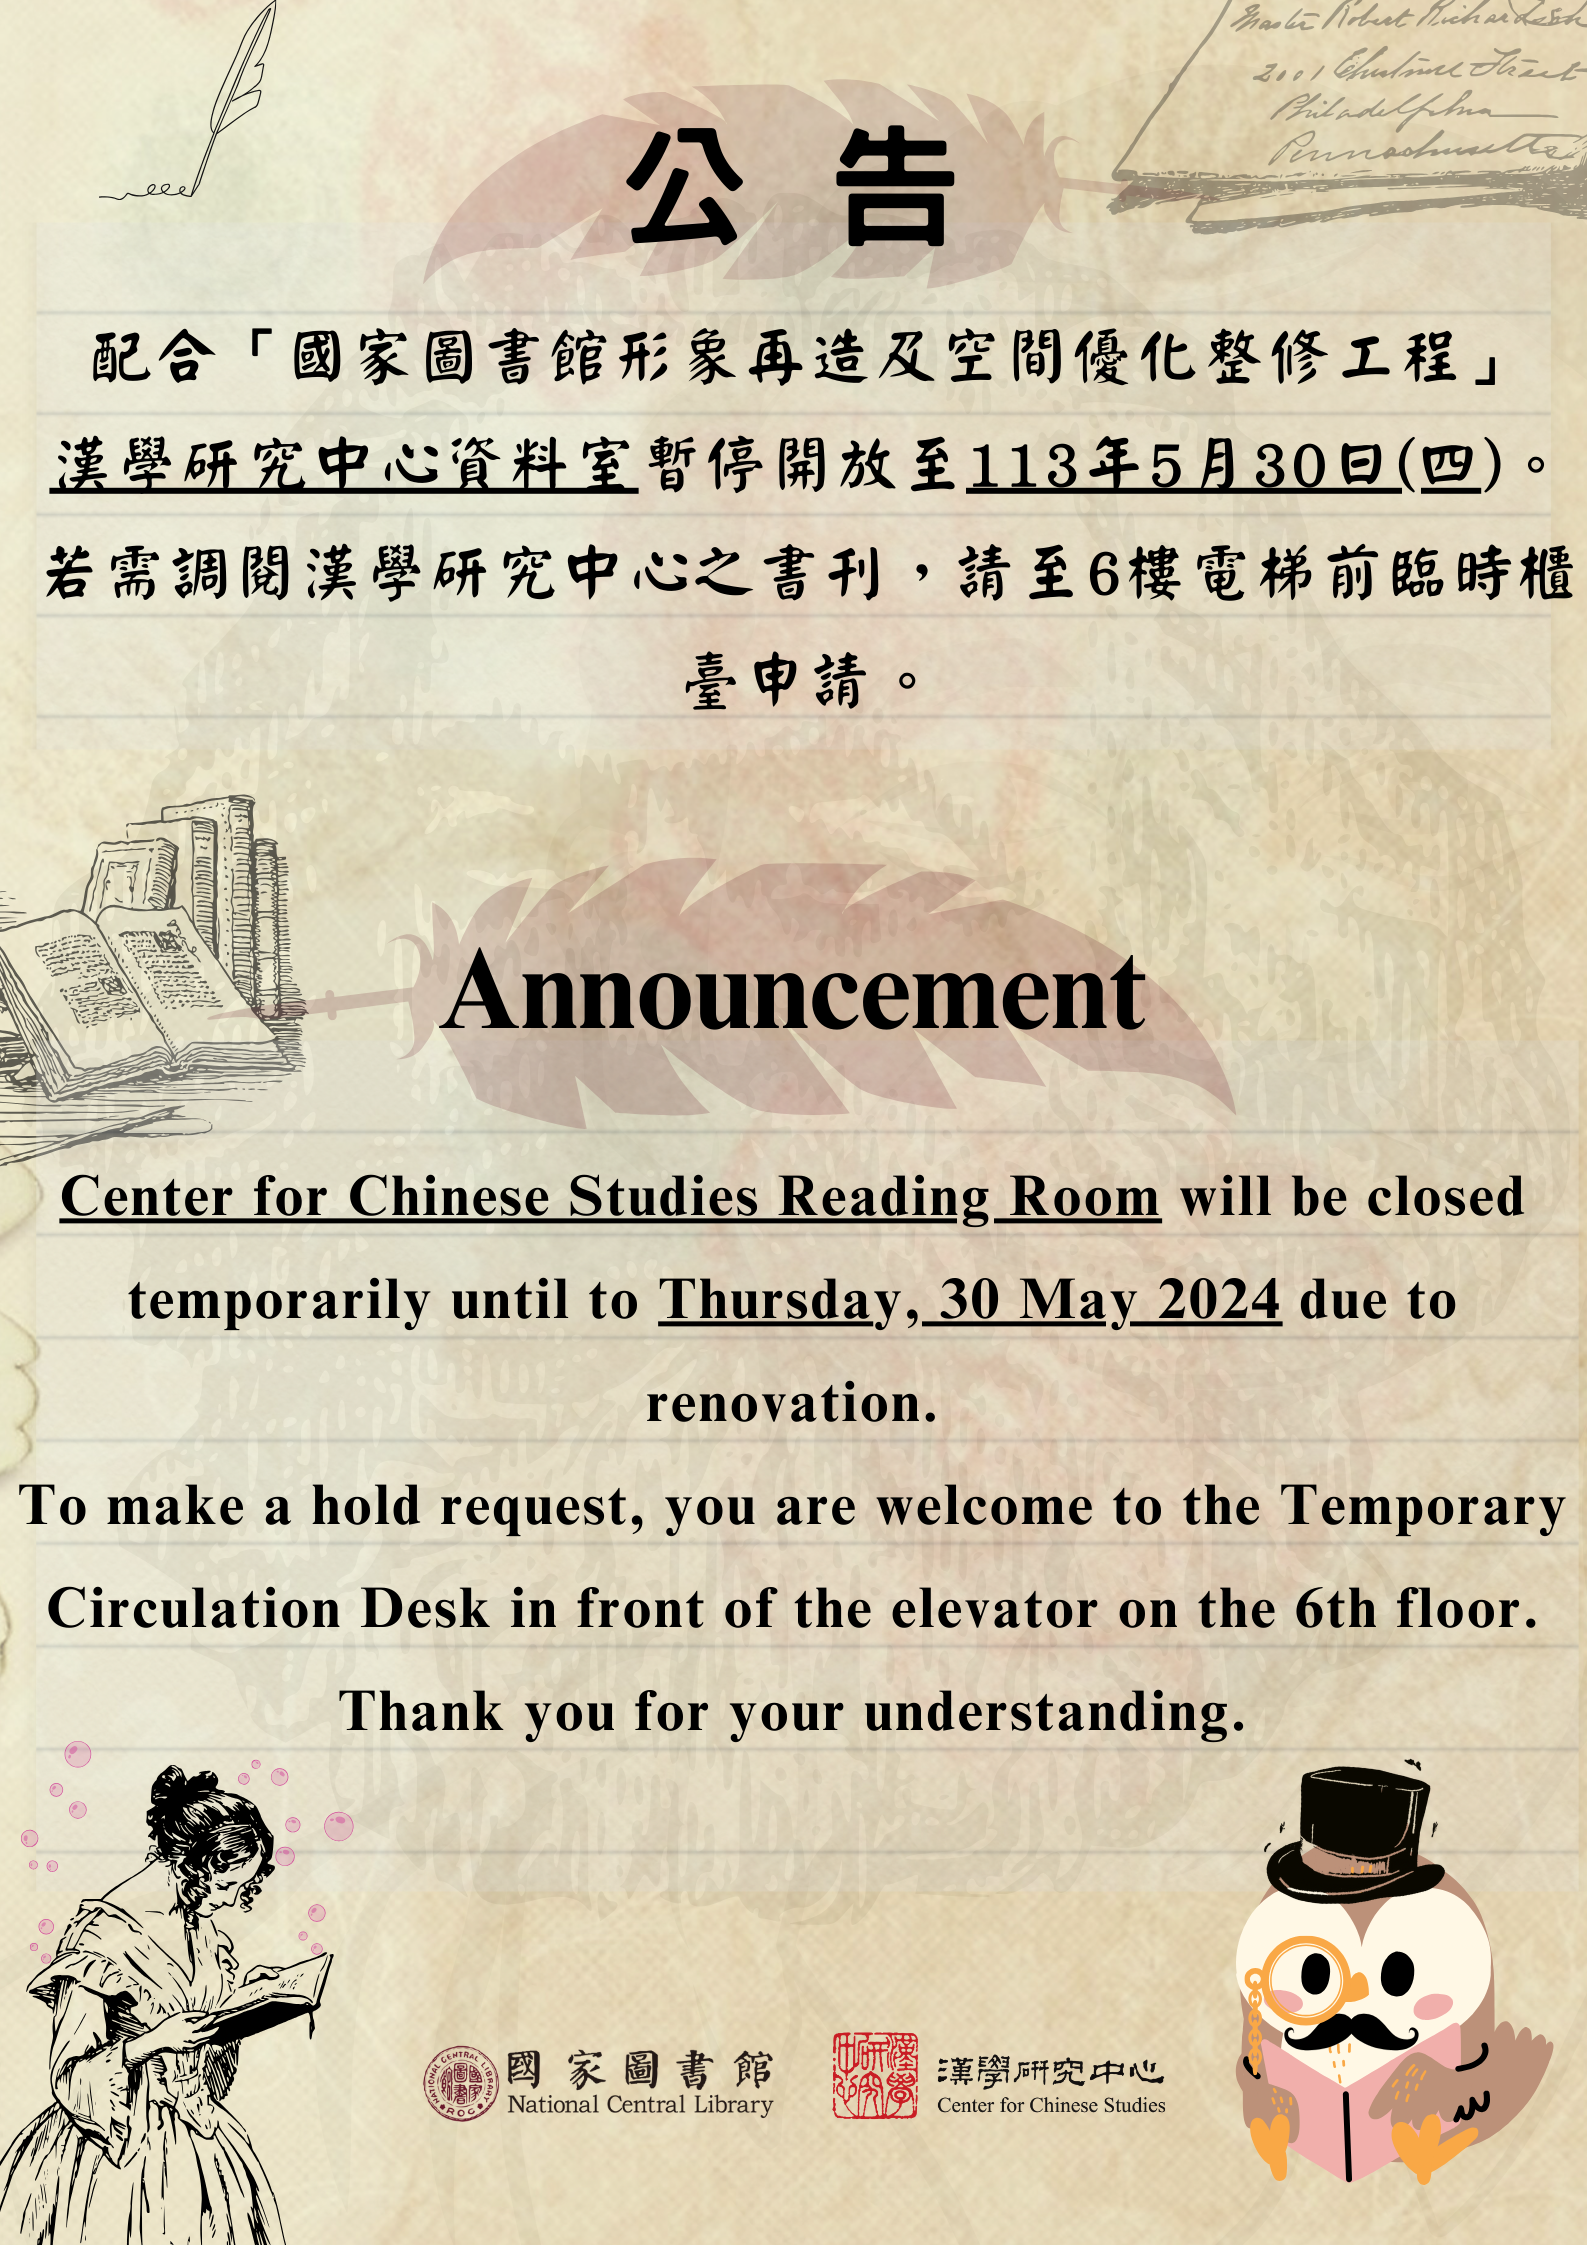 Center for Chinese Studies Reading Room will be closed temporarily until to Thursday, 30 May 2024